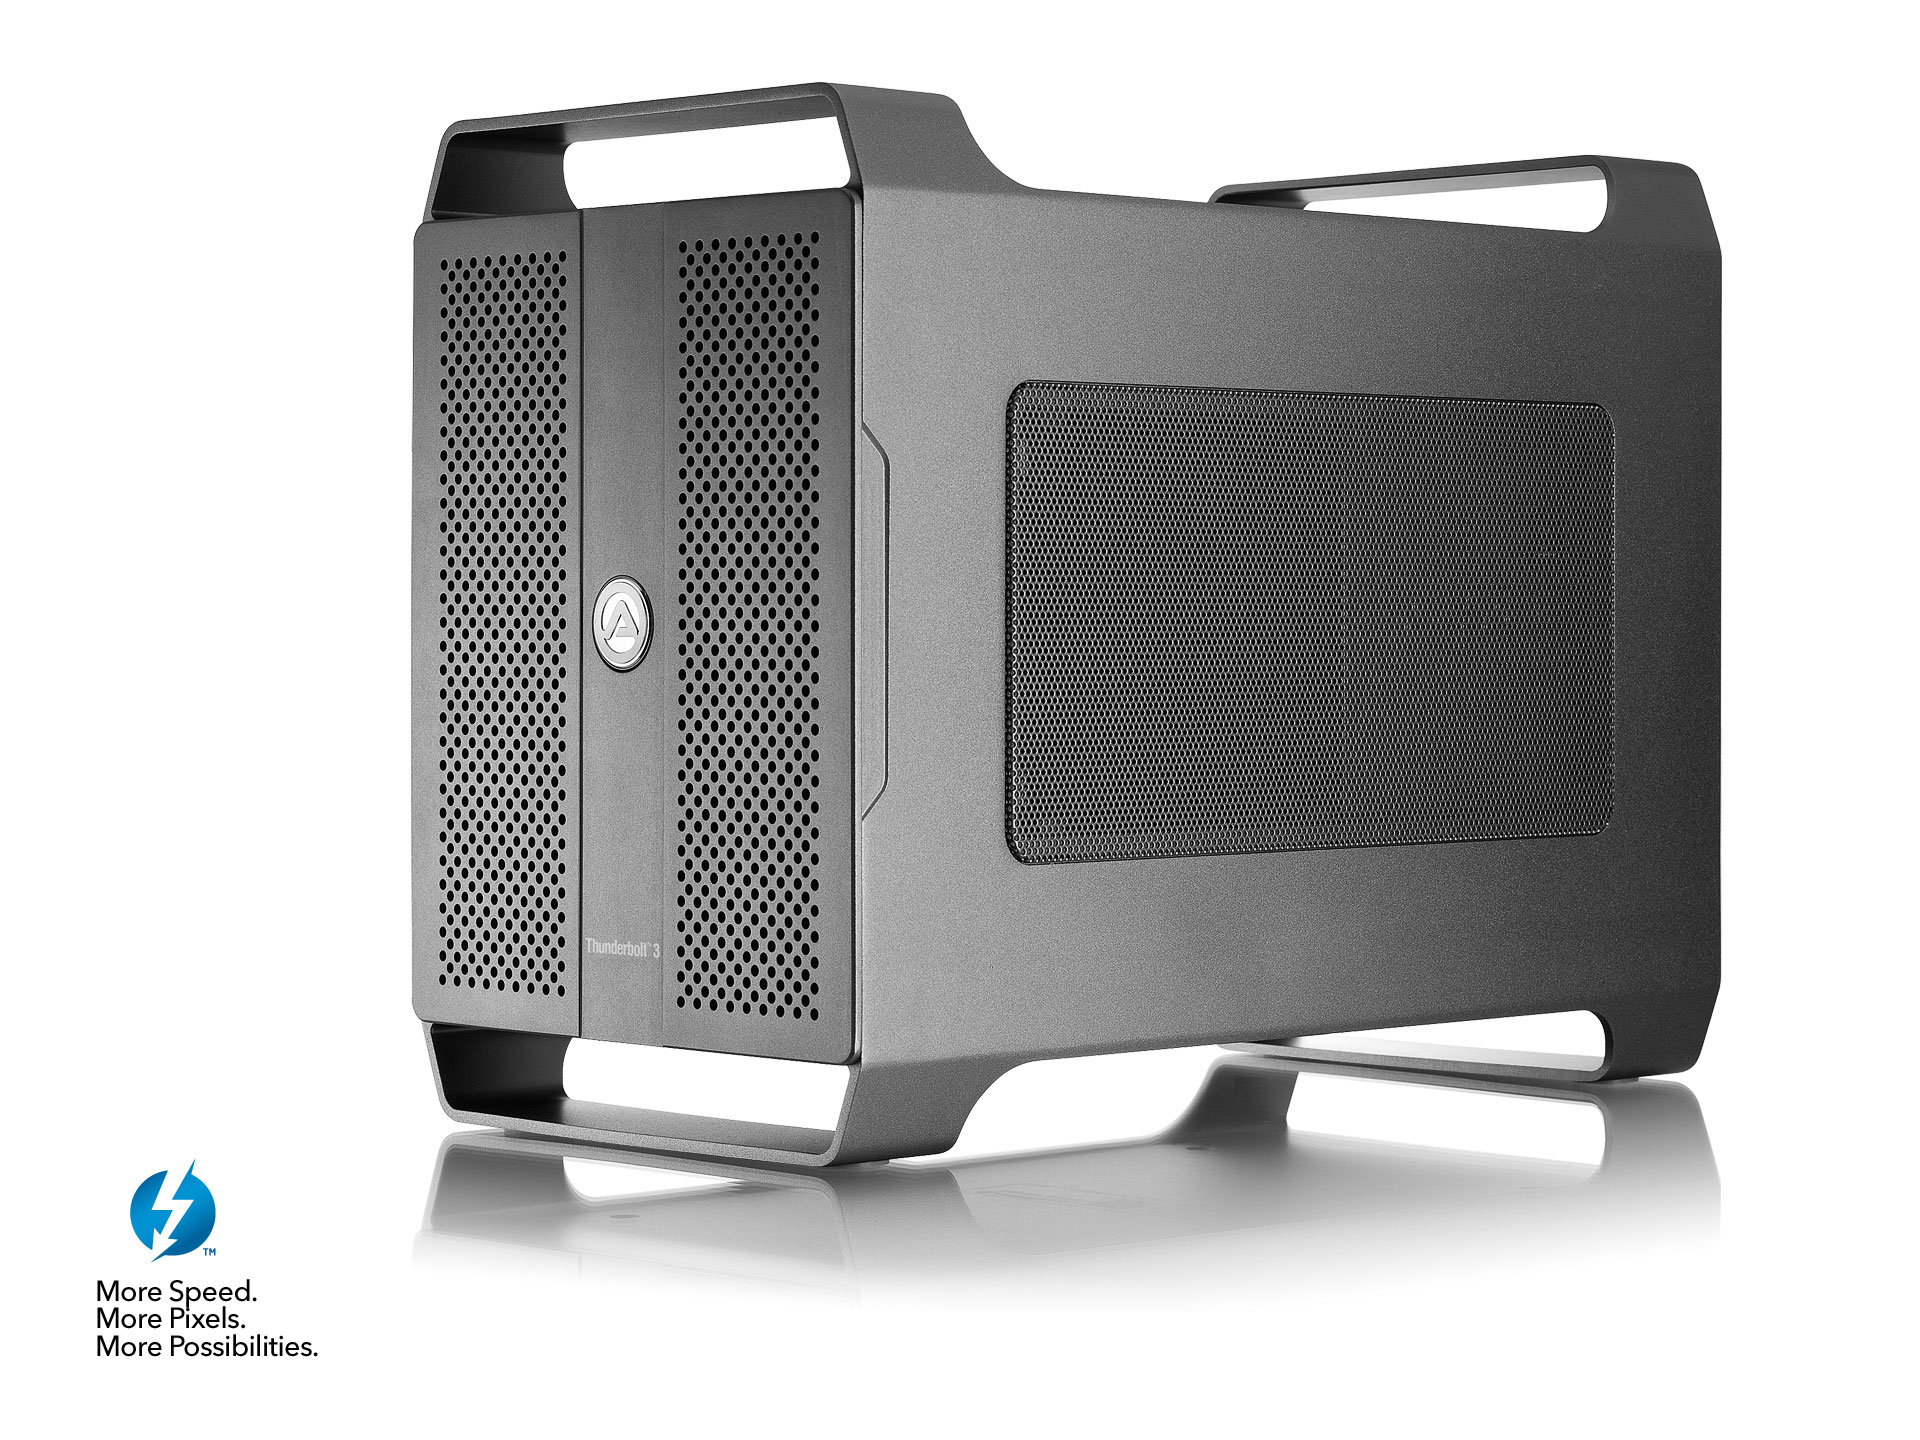 Node Duo - Thunderbolt 3 PCIe expansion chassis for 2 cards | AKiTiO